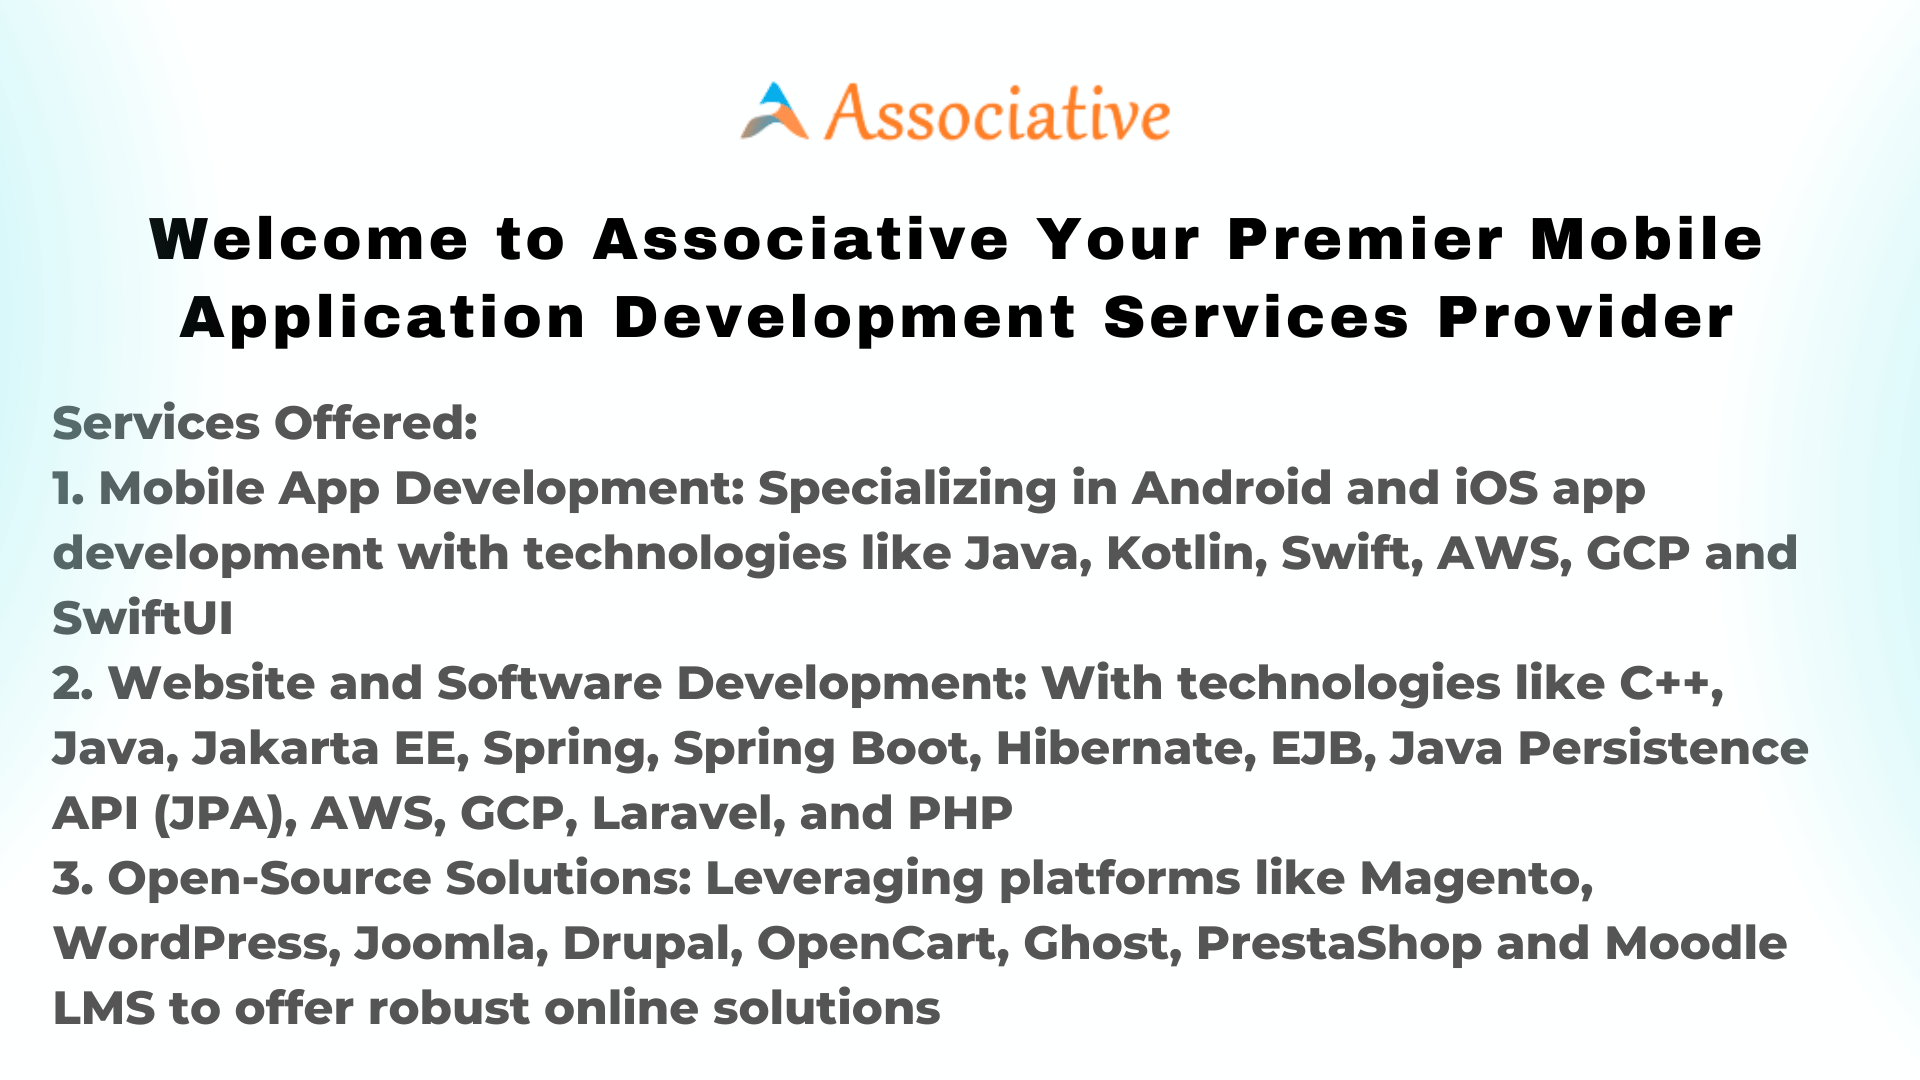 Welcome to Associative Your Premier Mobile Application Development Services Provider